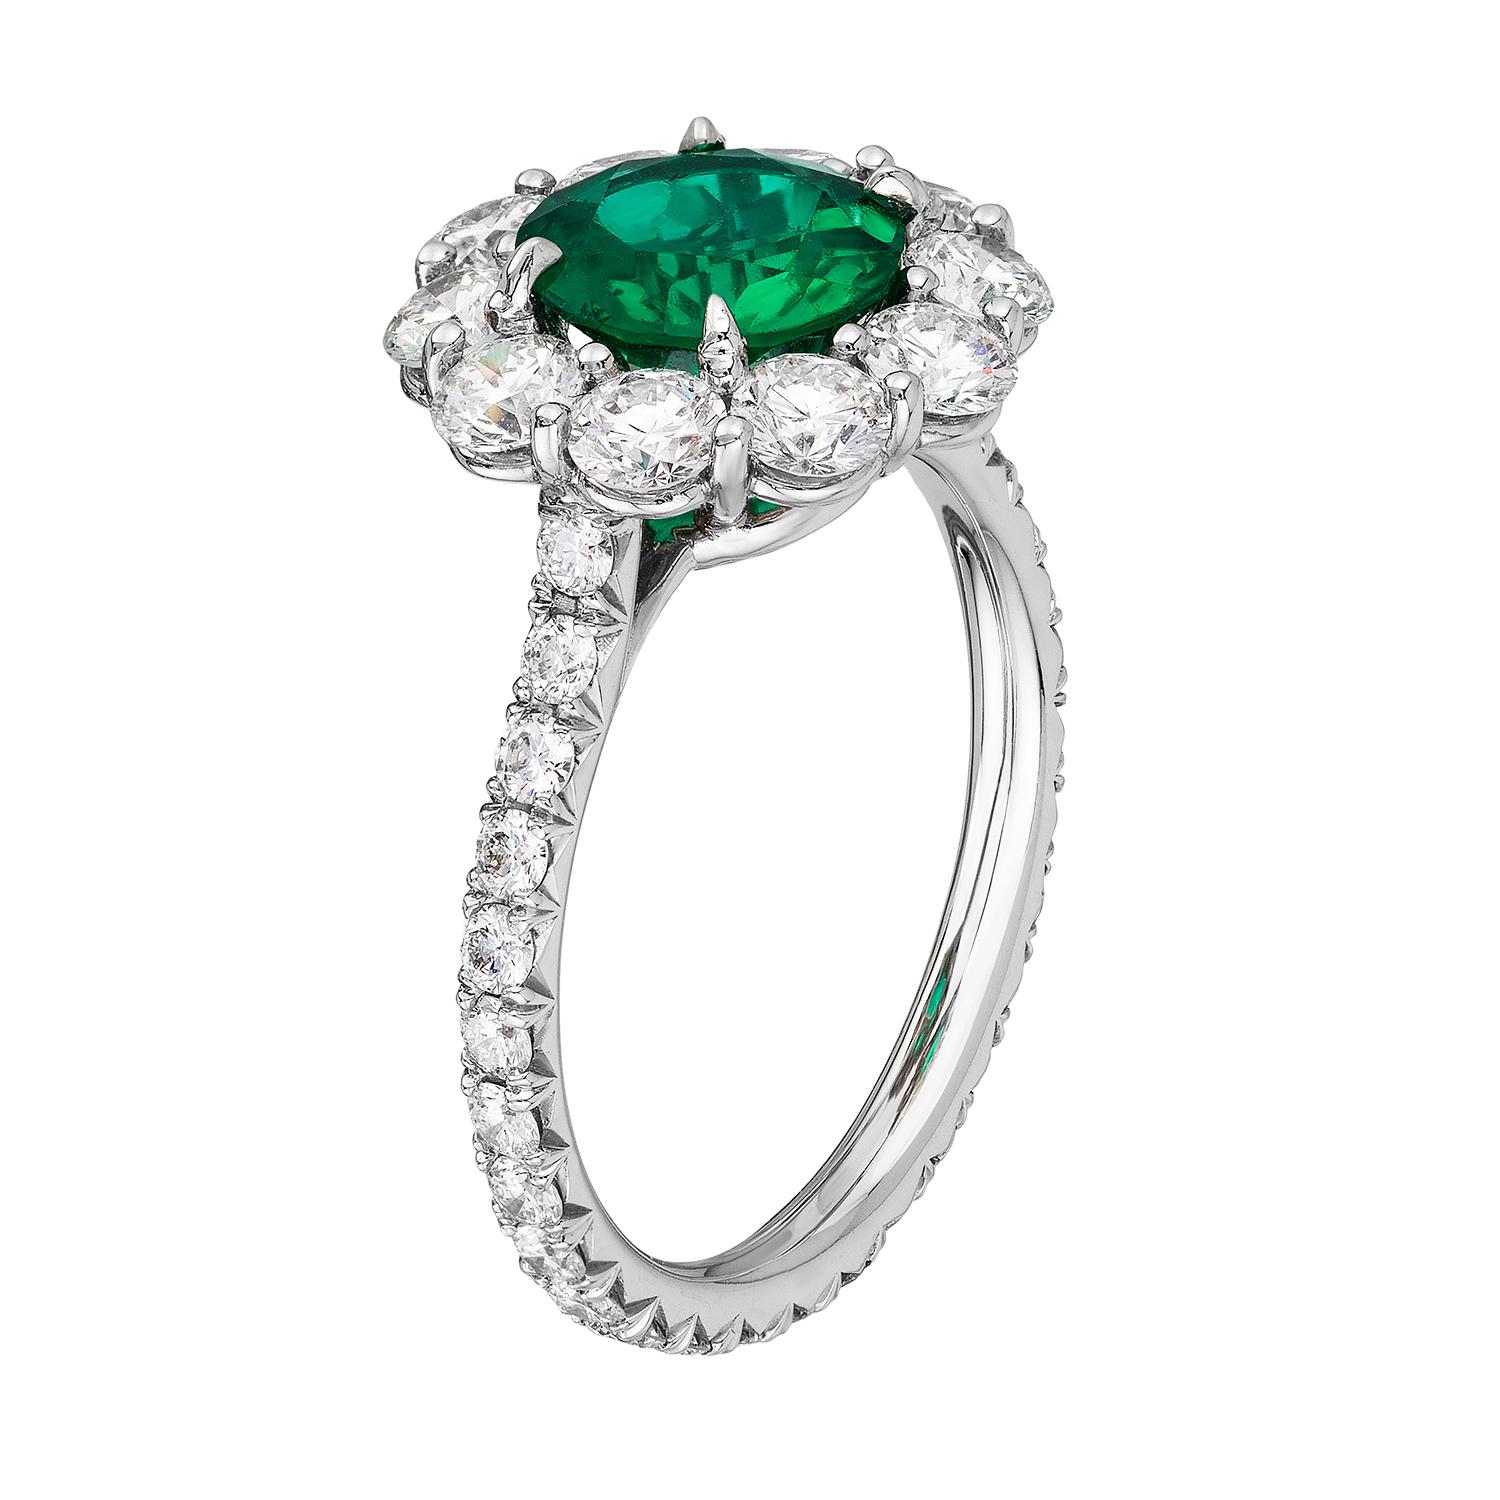 A platinum ring centered upon a beautiful 1.25 carat un-enhanced round Zambian emerald, certified by C. Dunaigre Consulting, set within a colorless diamond surround with colorless diamond micropavé on the shank. Total diamond weight 1.70